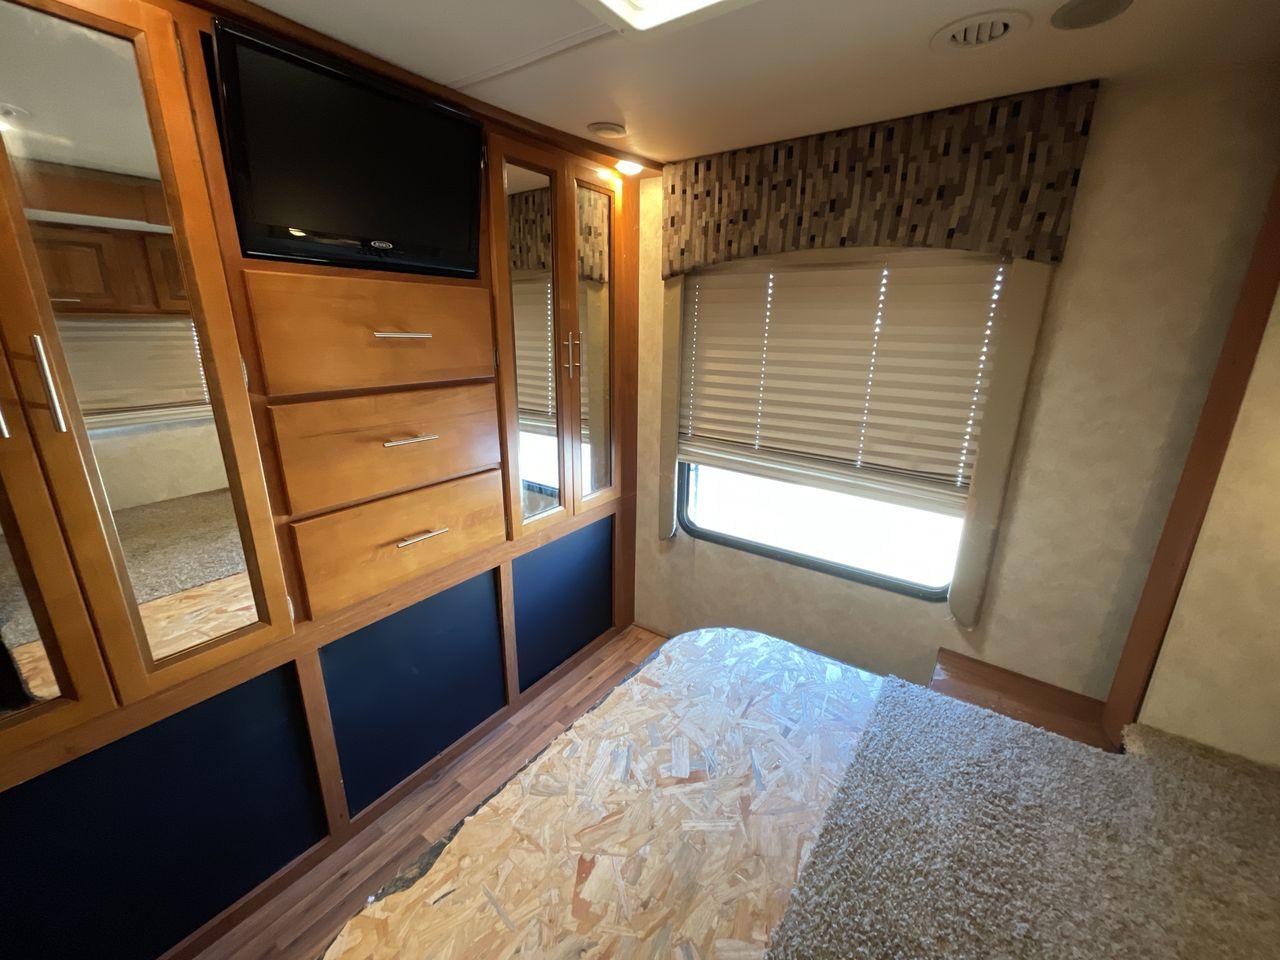 2011 WHITE COACHMEN CONCORD 300TS (1FDEX4FS9BD) , Length: 30.83 ft. | Dry Weight: 12,110 lbs. | Gross Weight: 14,500 lbs. | Slides: 3 transmission, located at 4319 N Main St, Cleburne, TX, 76033, (817) 678-5133, 32.385960, -97.391212 - The 2011 Coachmen Concord 300TS, a class C motorhome that redefines travel comfort and convenience. With a length of 31 feet, this well-maintained model is built on a Ford E450 chassis, powered by a dependable Triton V10 engine, ensuring a smooth and reliable journey. The Concord 300TS features thre - Photo #17